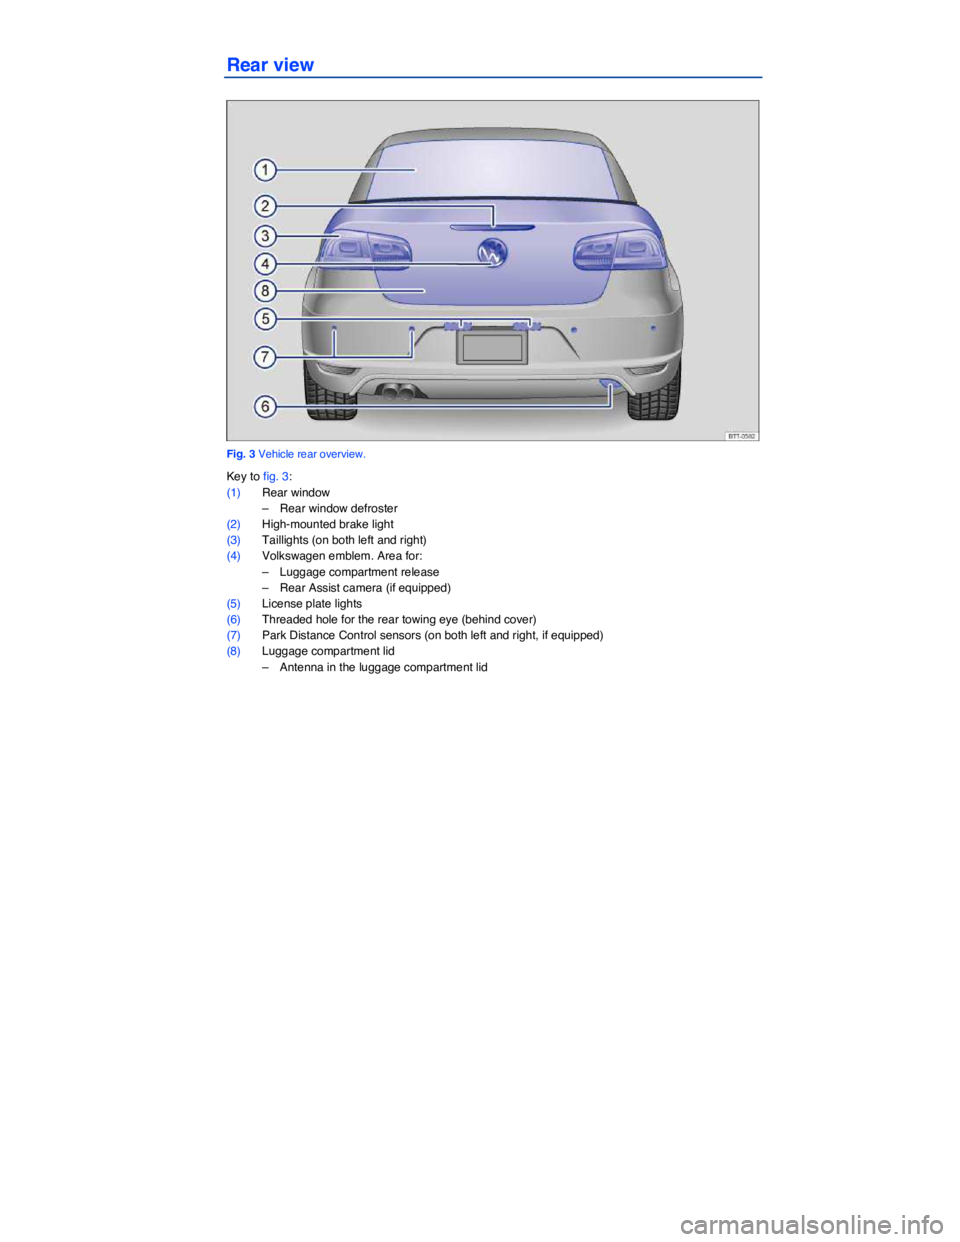 VOLKSWAGEN EOS 2012  Owners Manual  
 
Rear view 
 
Fig. 3 Vehicle rear overview. 
Key to fig. 3: 
(1) Rear window 
–  Rear window defroster  
(2) High-mounted brake light 
(3) Taillights (on both left and right)  
(4) Volkswagen emb